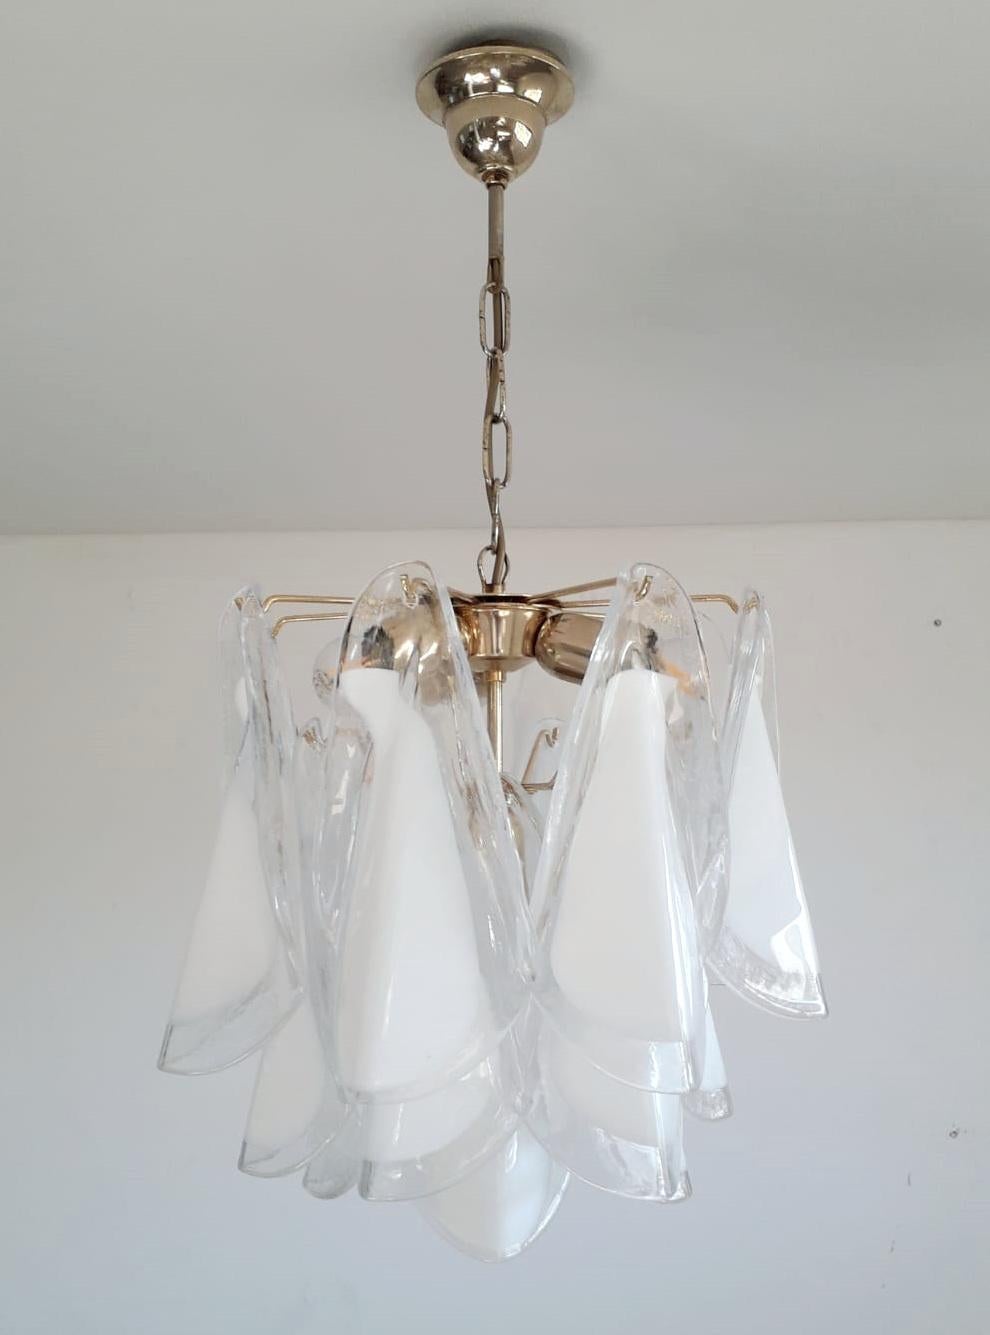 Vintage Italian chandelier with milky white Murano glass petals suspended on brass frame / Made in Italy by Mazzega, circa 1960s
Measures: diameter 16 inches, chandelier height 16 inches, total height 27.5 inches including chain and canopy
4 lights